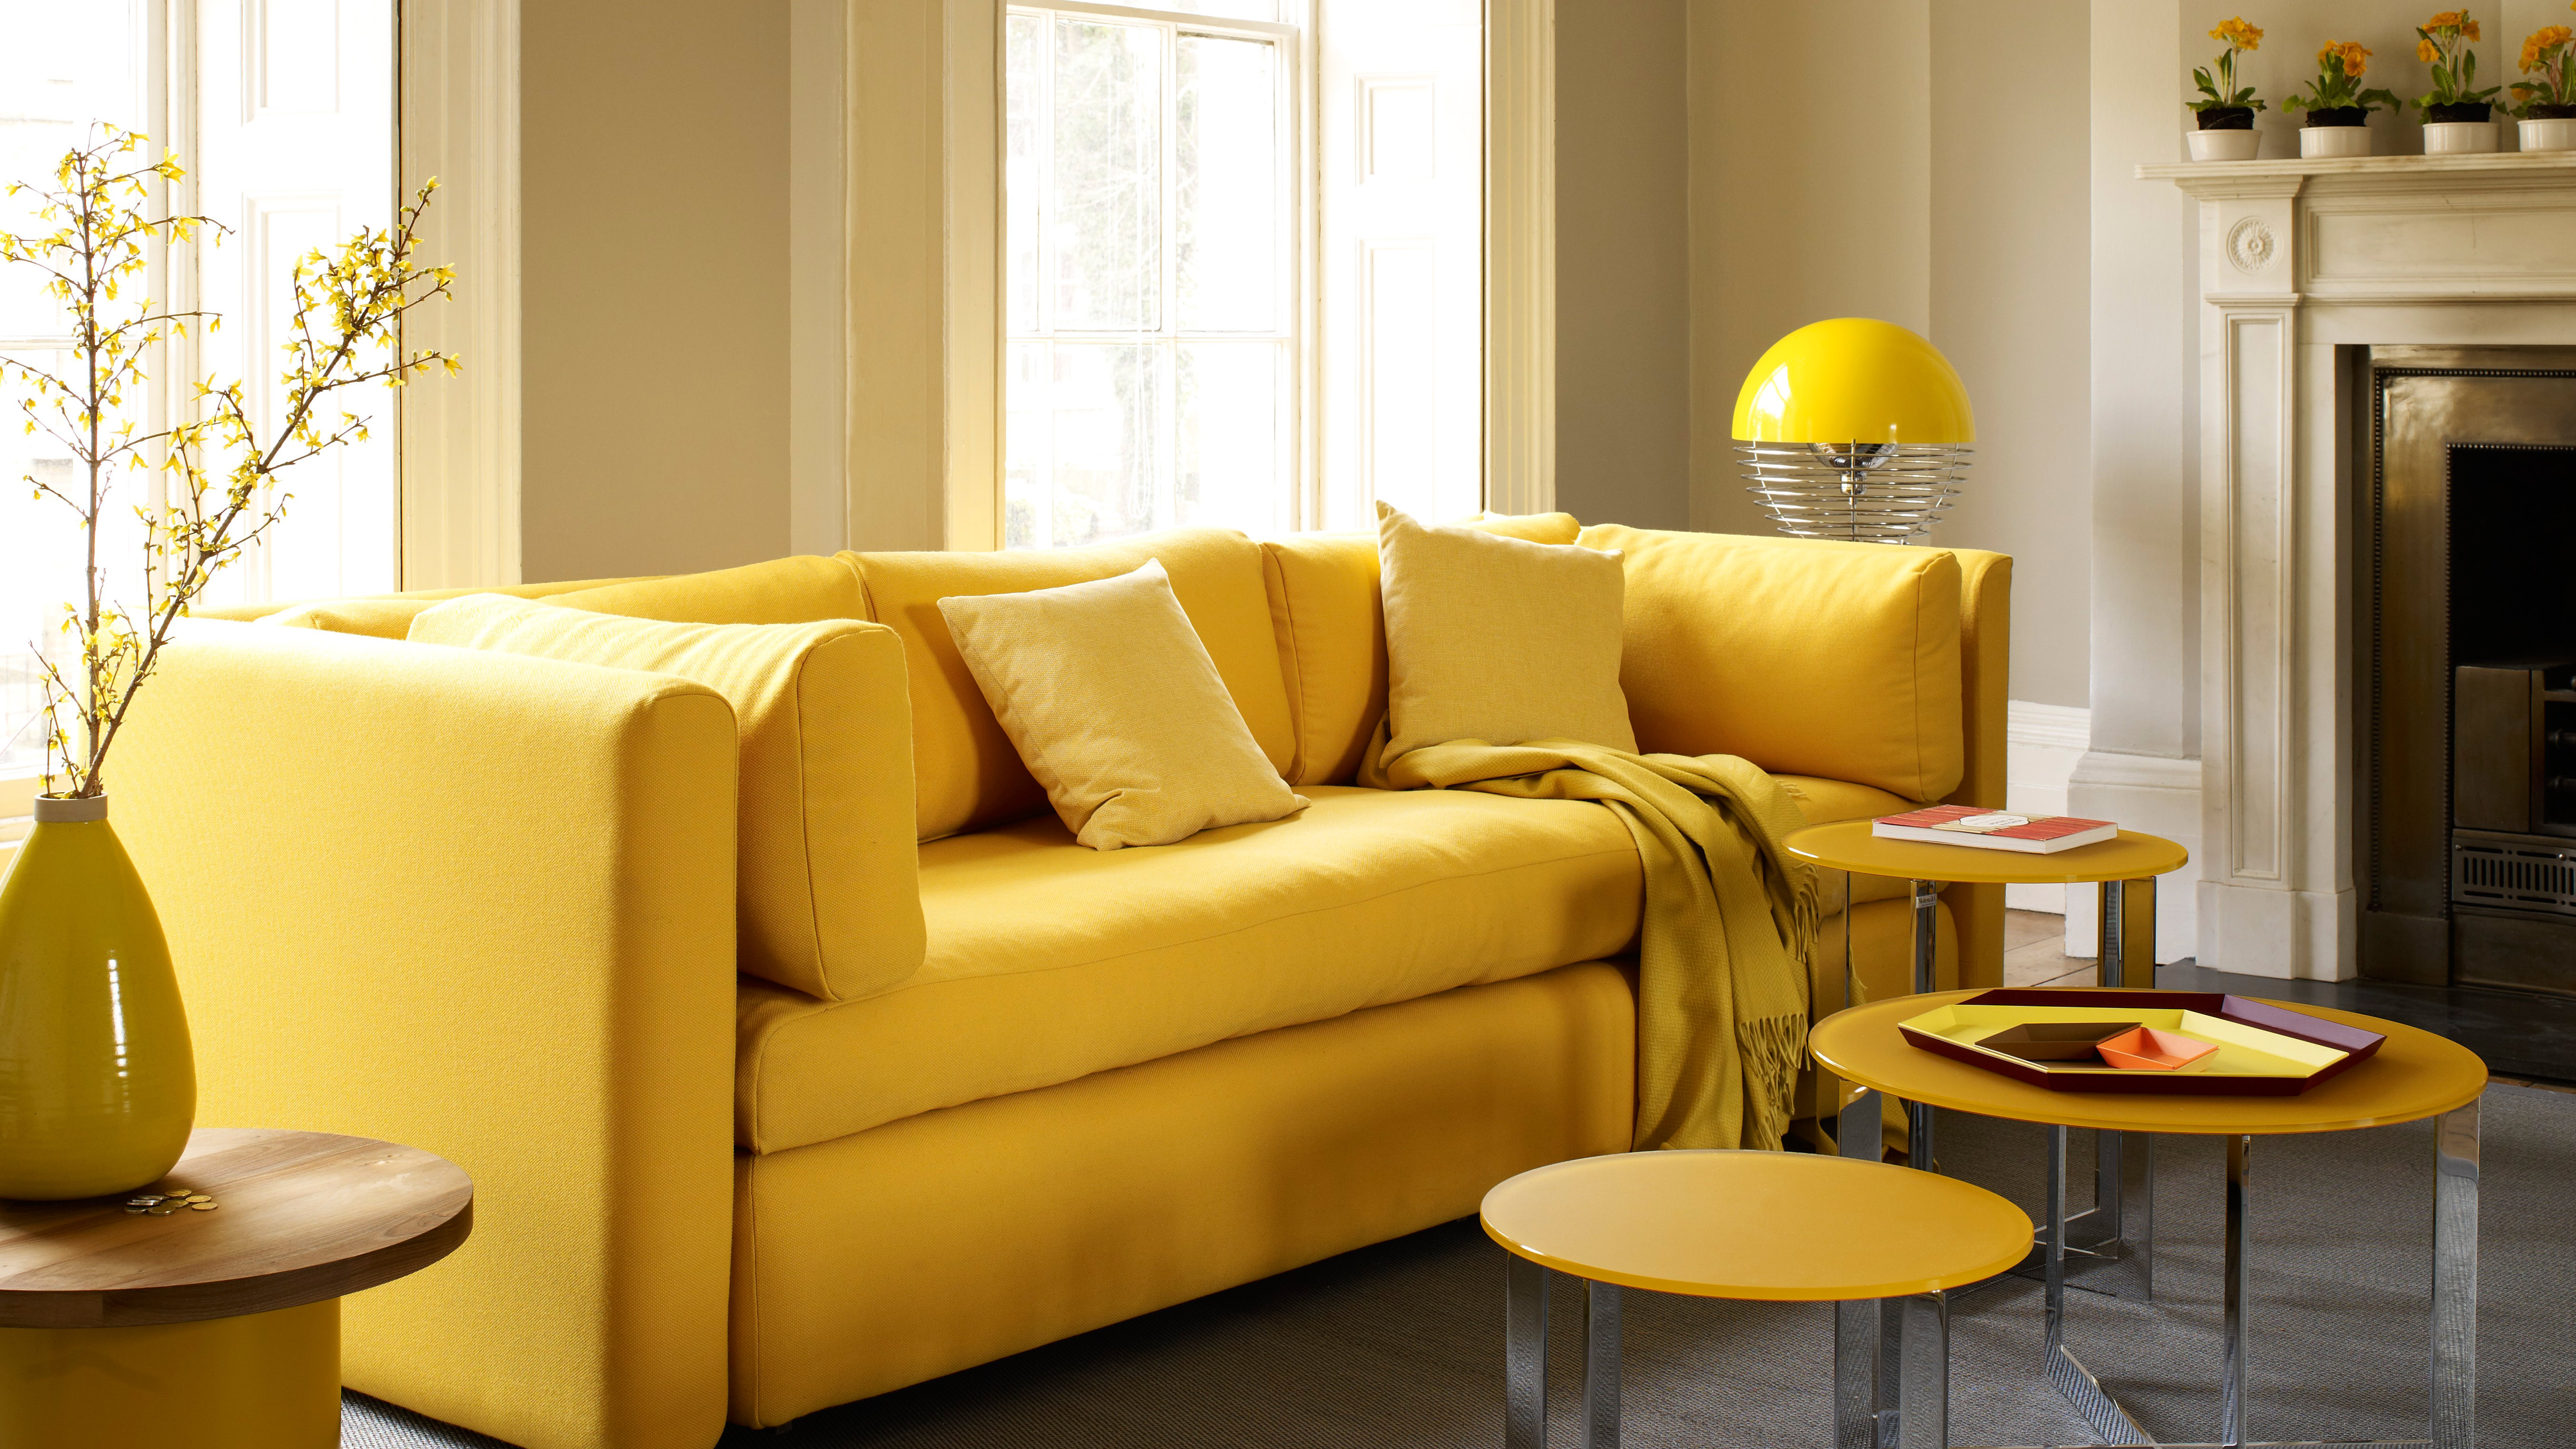 10 yellow living room ideas - how to do the sunshine shade